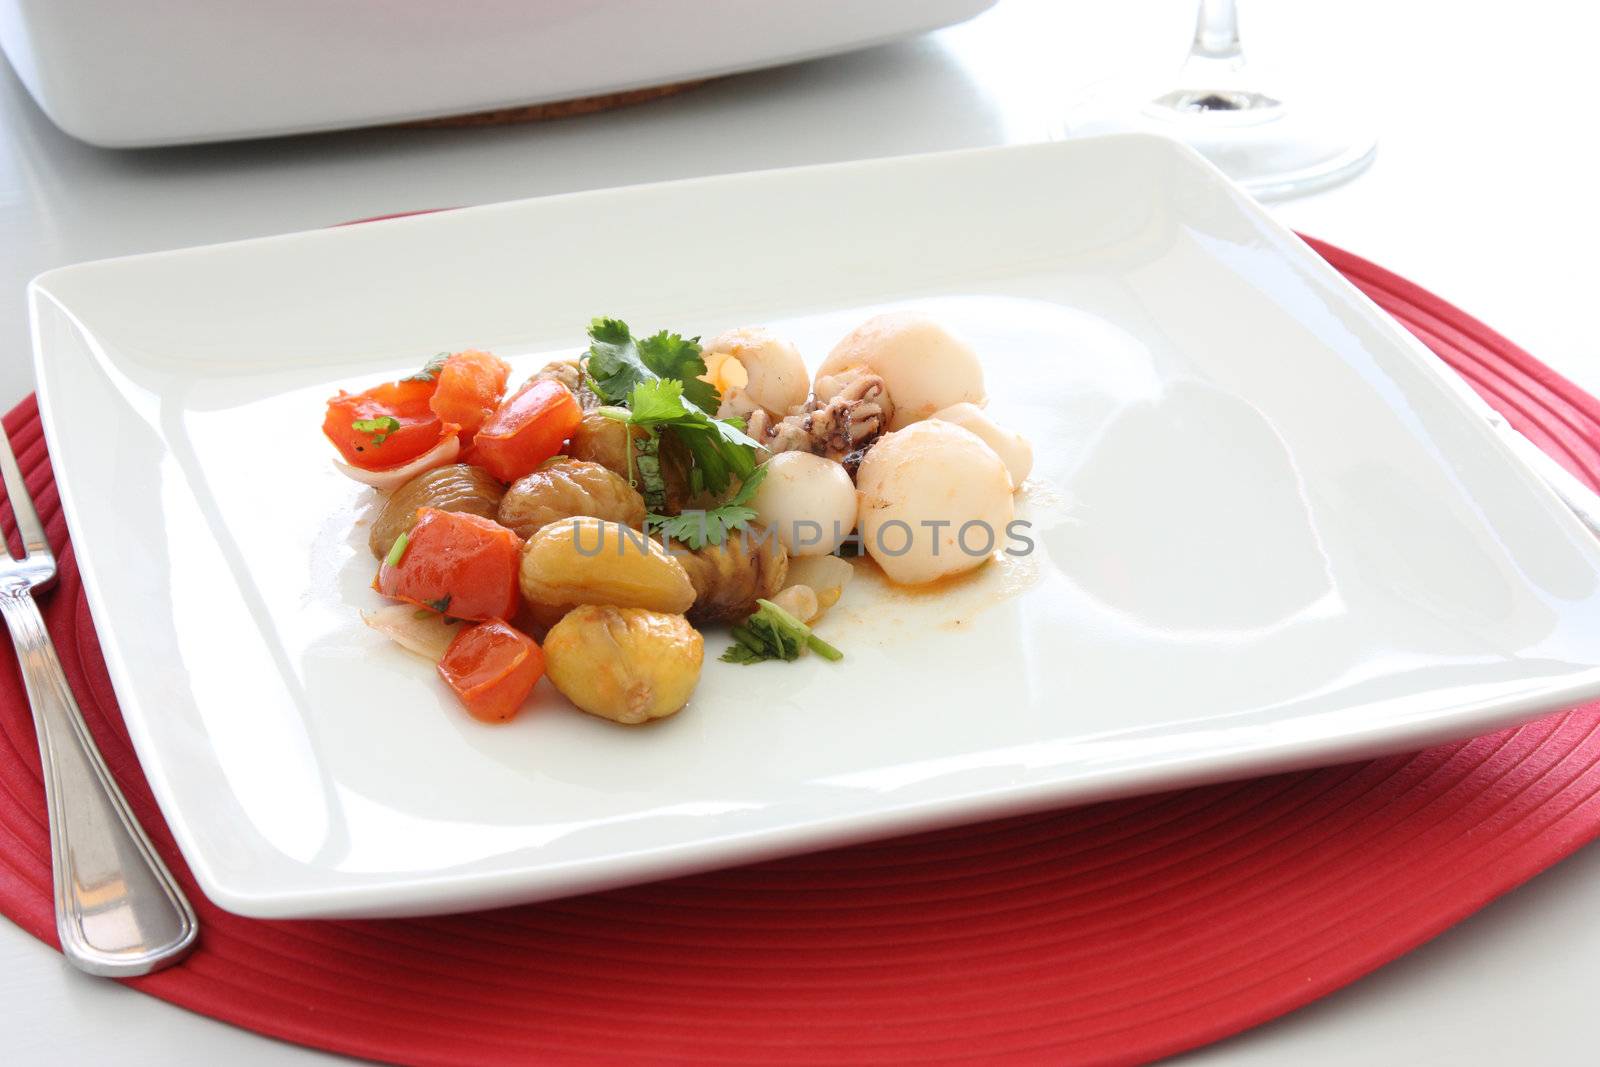 Cuttlefish dish with chestnuts and tomatoes.